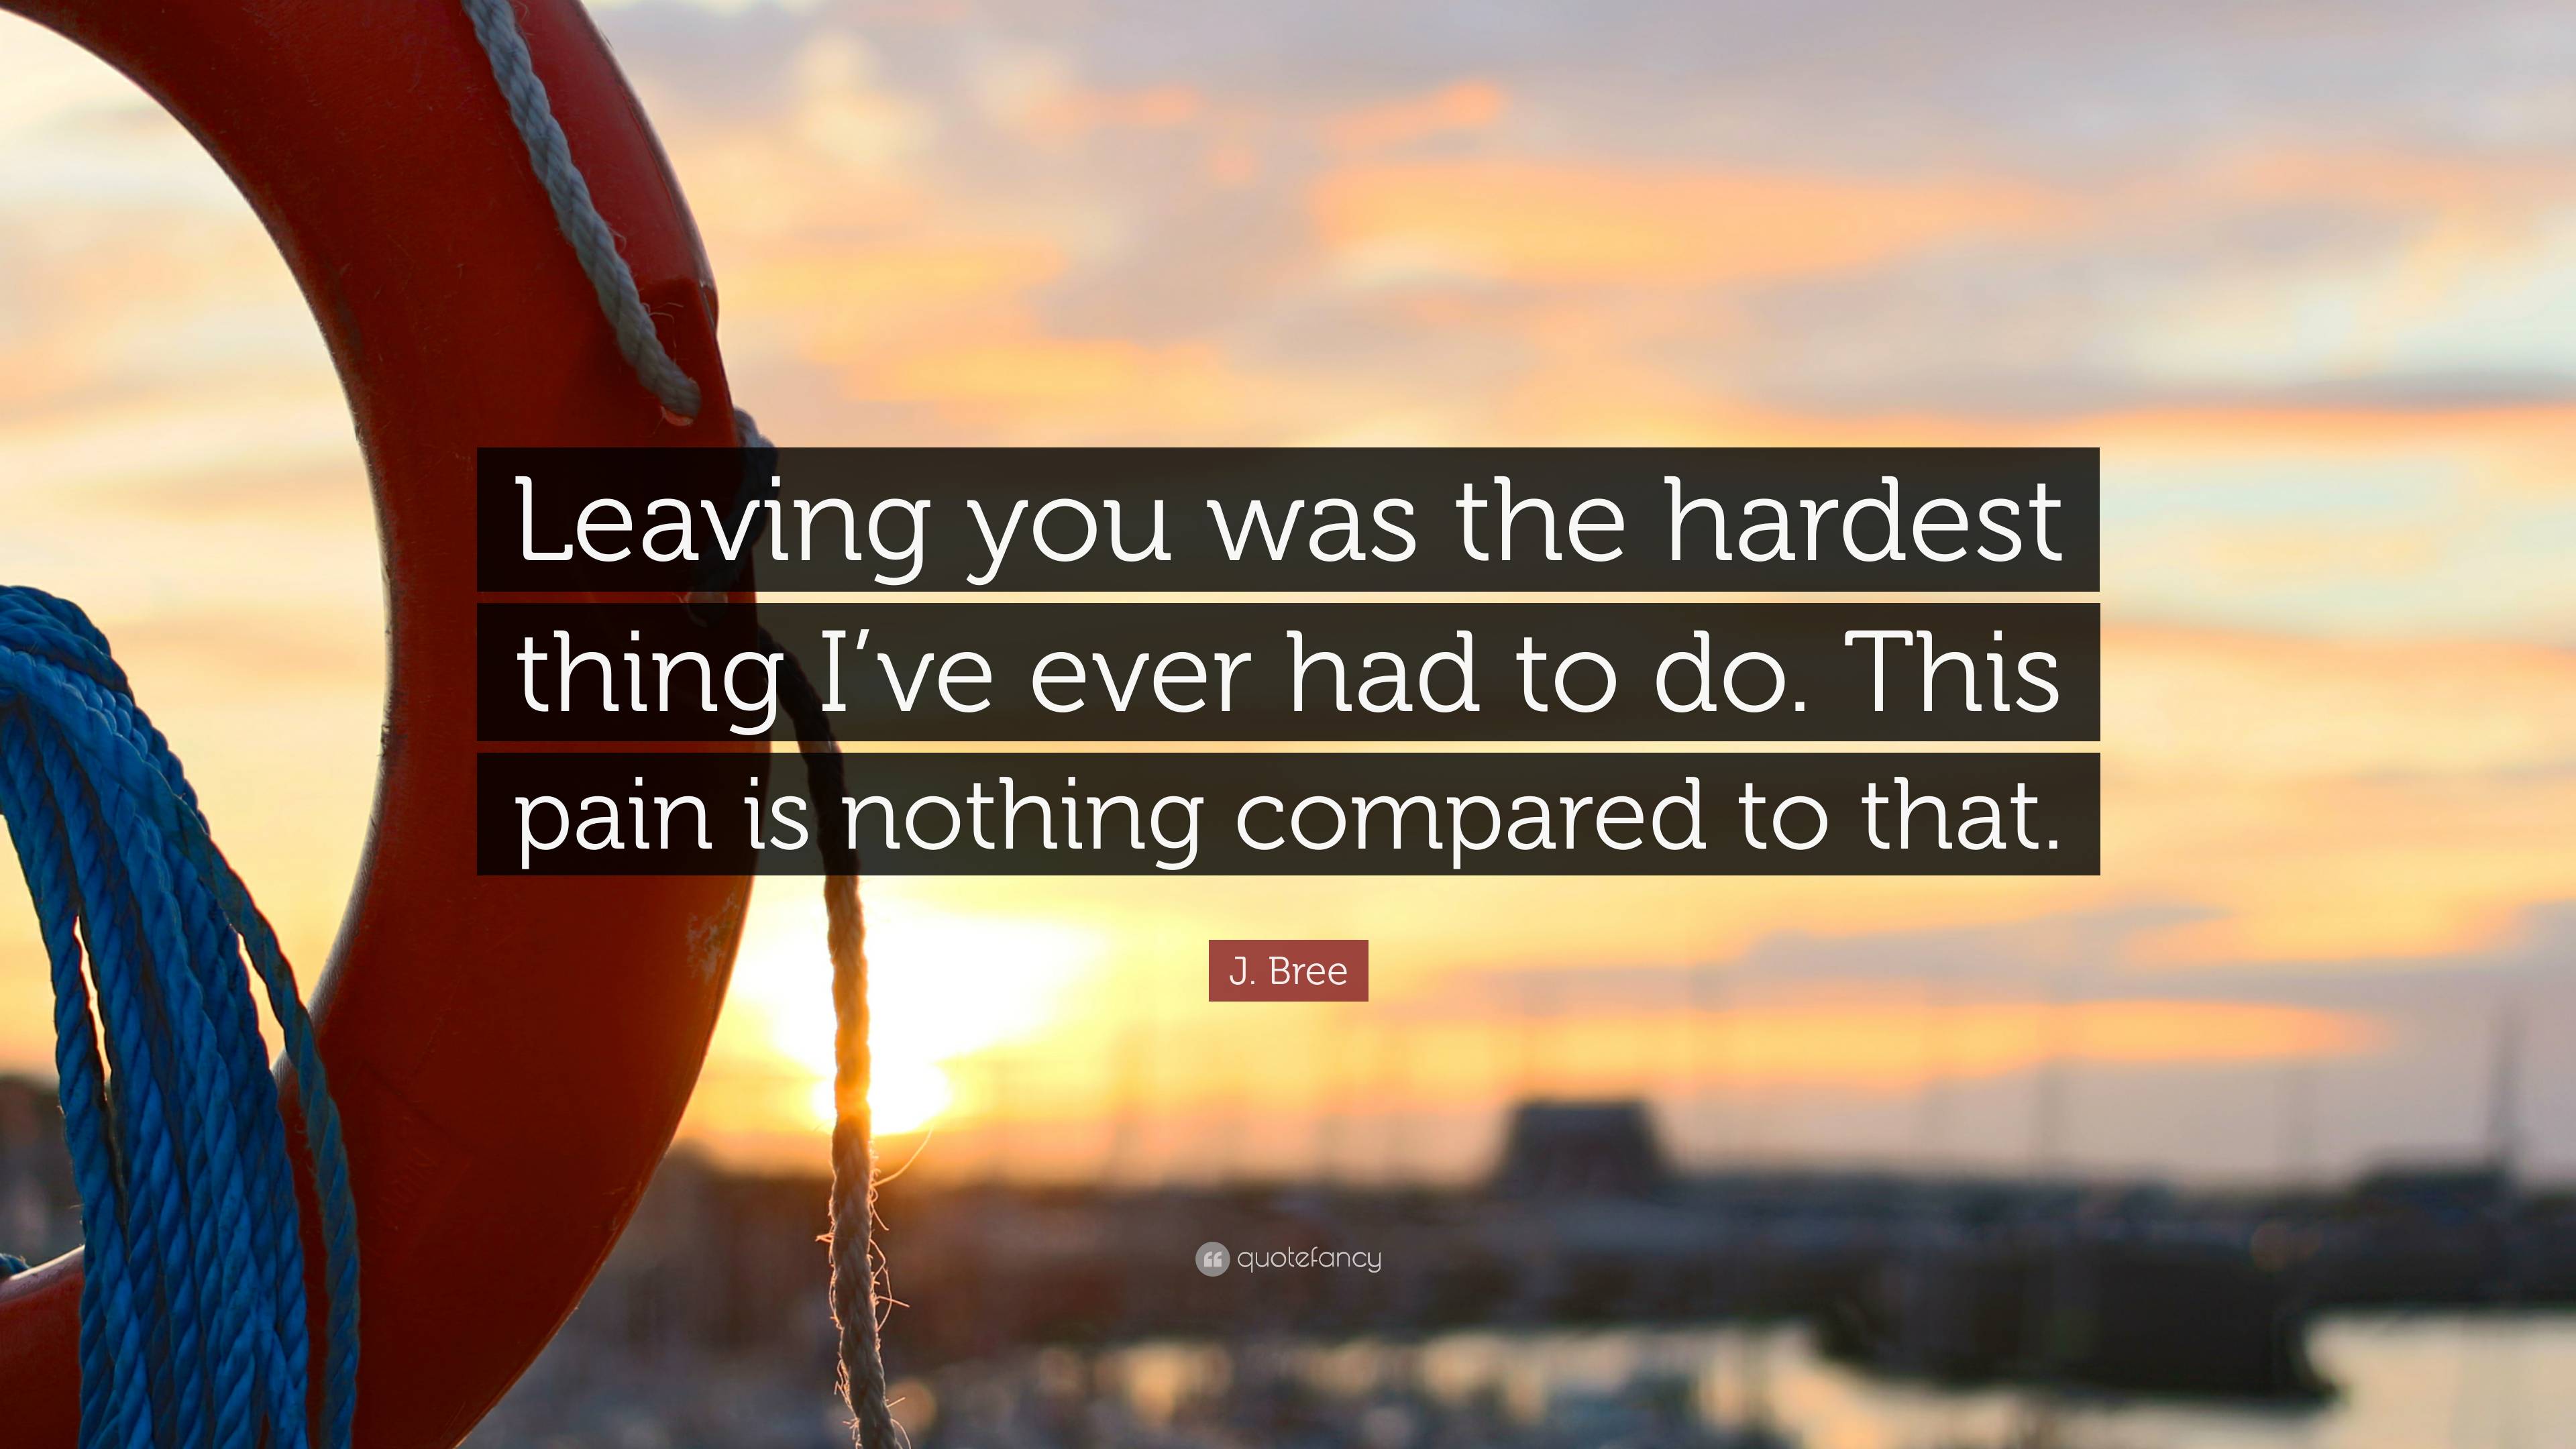 J. Bree Quote: “Leaving you was the hardest thing I’ve ever had to do ...